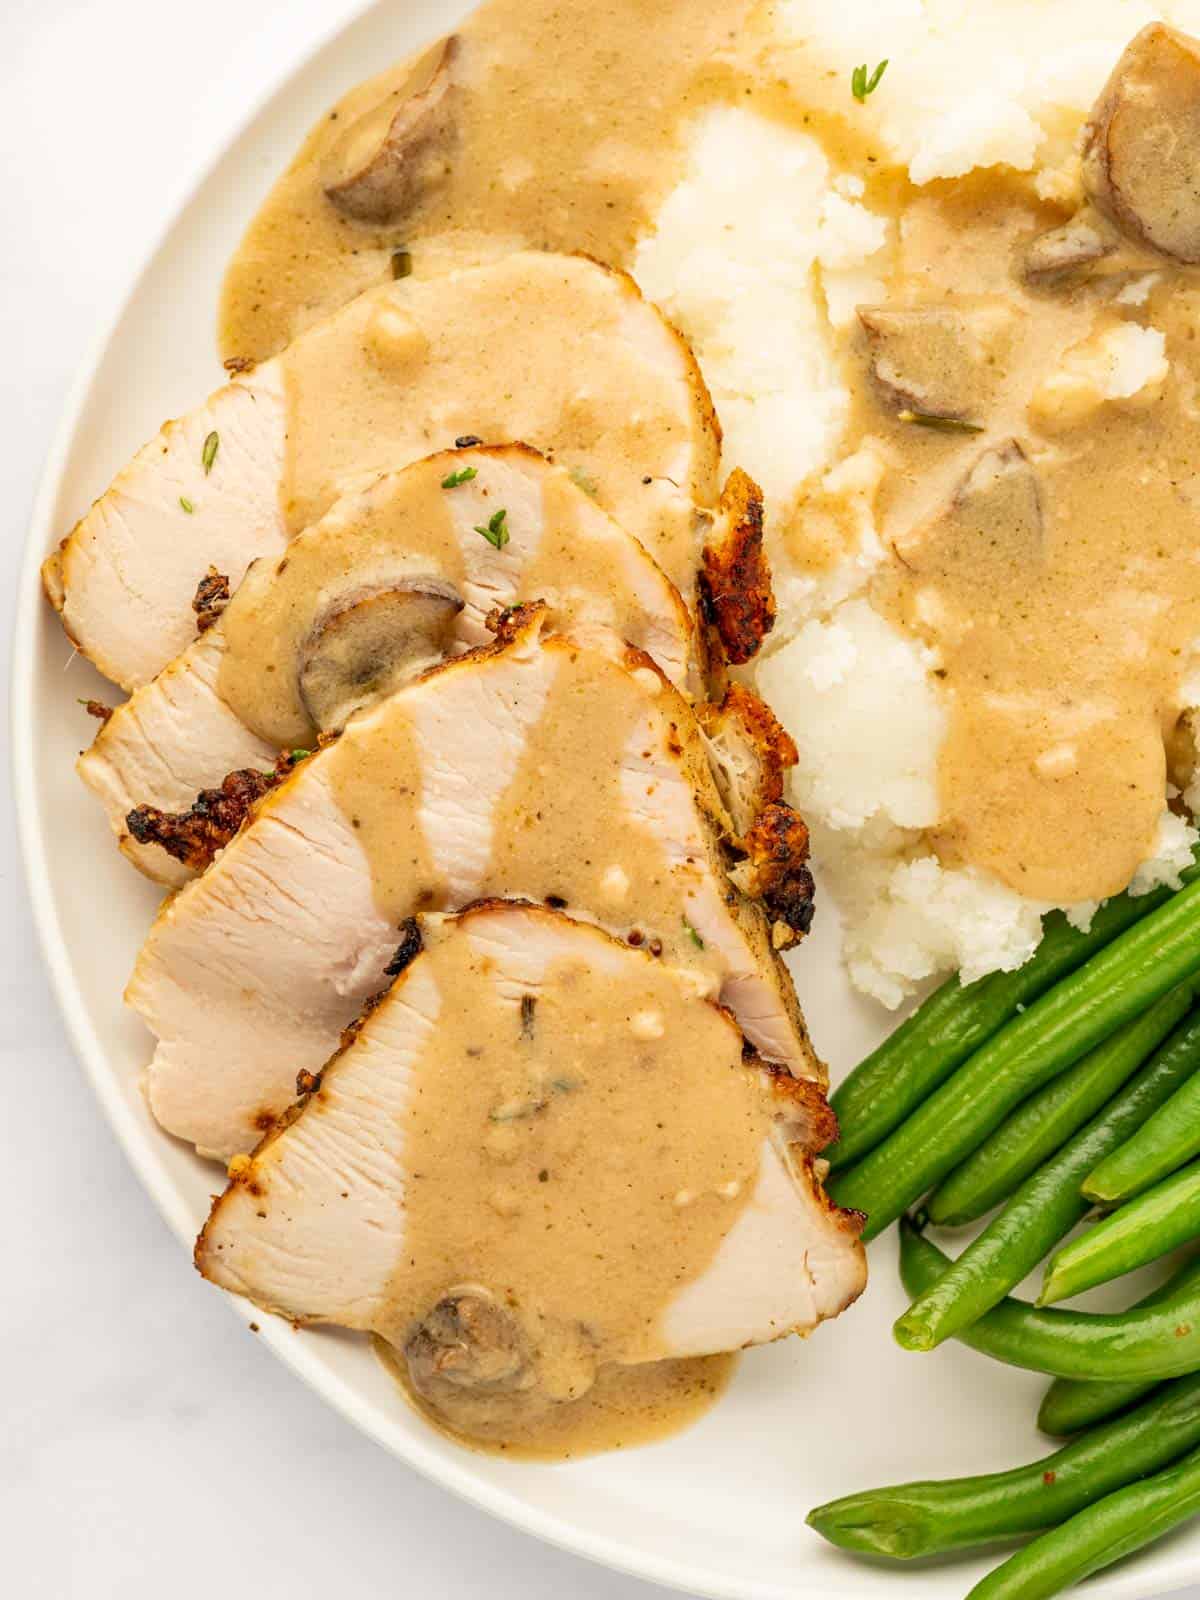 Slices of turkey breast are topped with gravy.